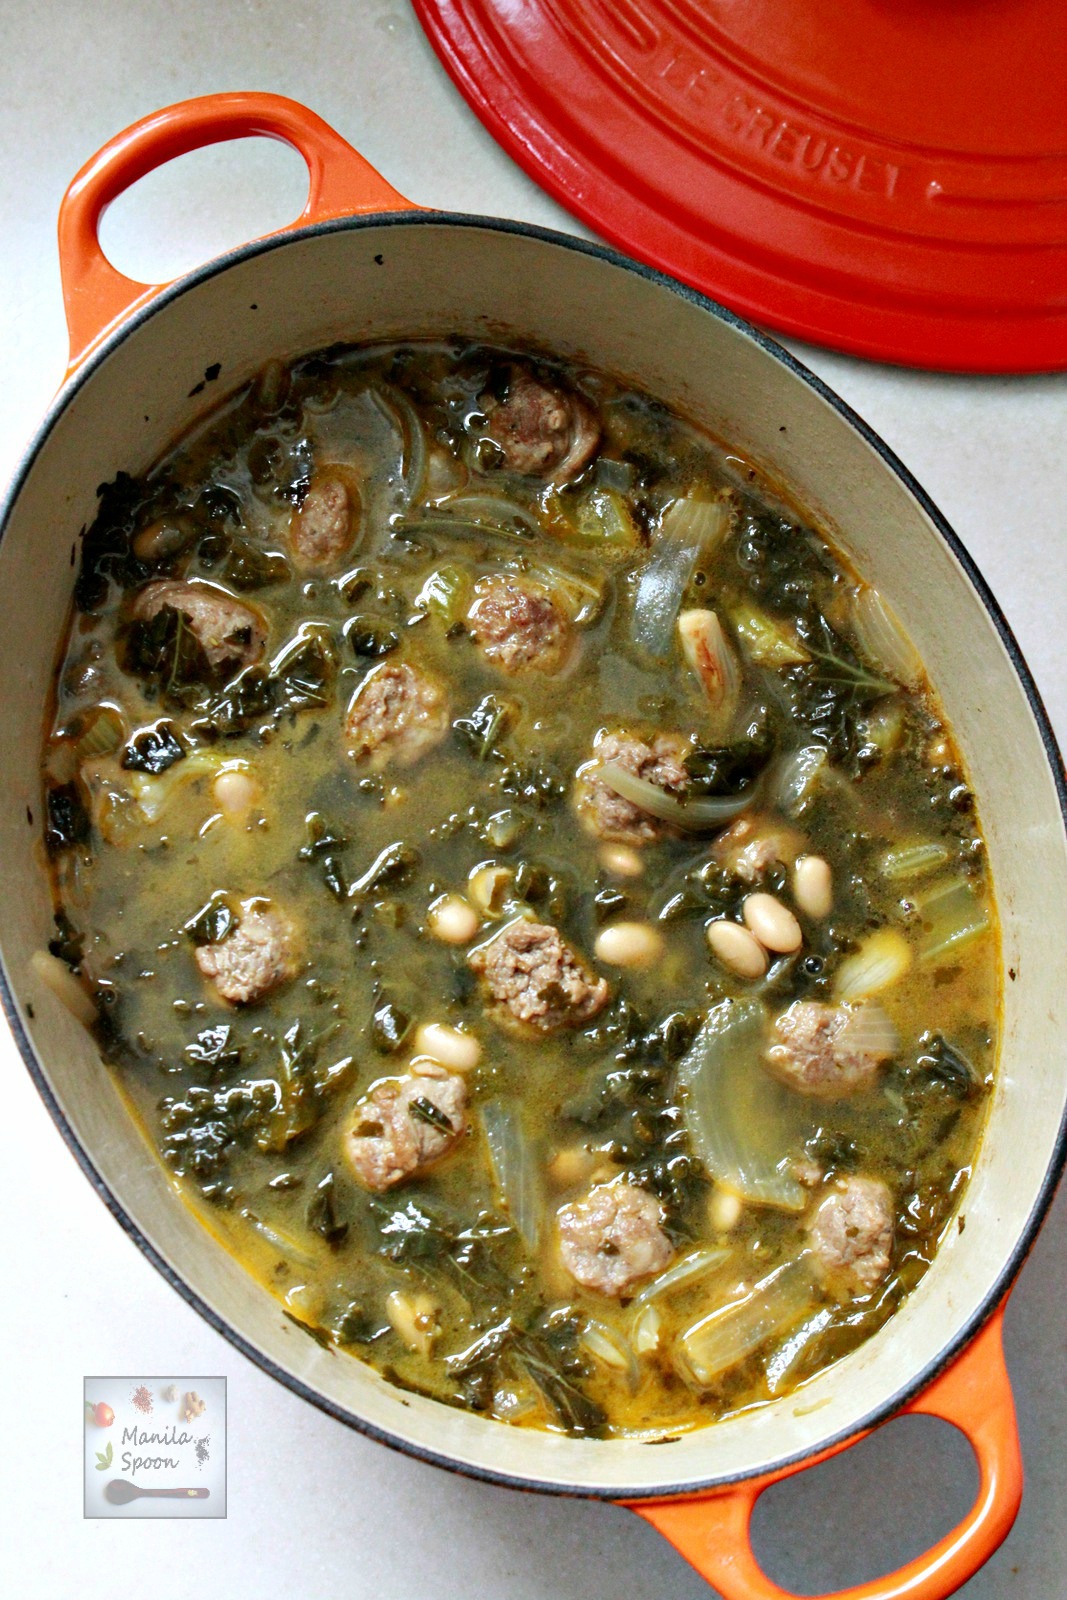 In 30 minutes you have a delicious, nutritious and hearty soup for the whole family - Italian Sausage, Kale and White Bean Soup. Easy recipe, too.